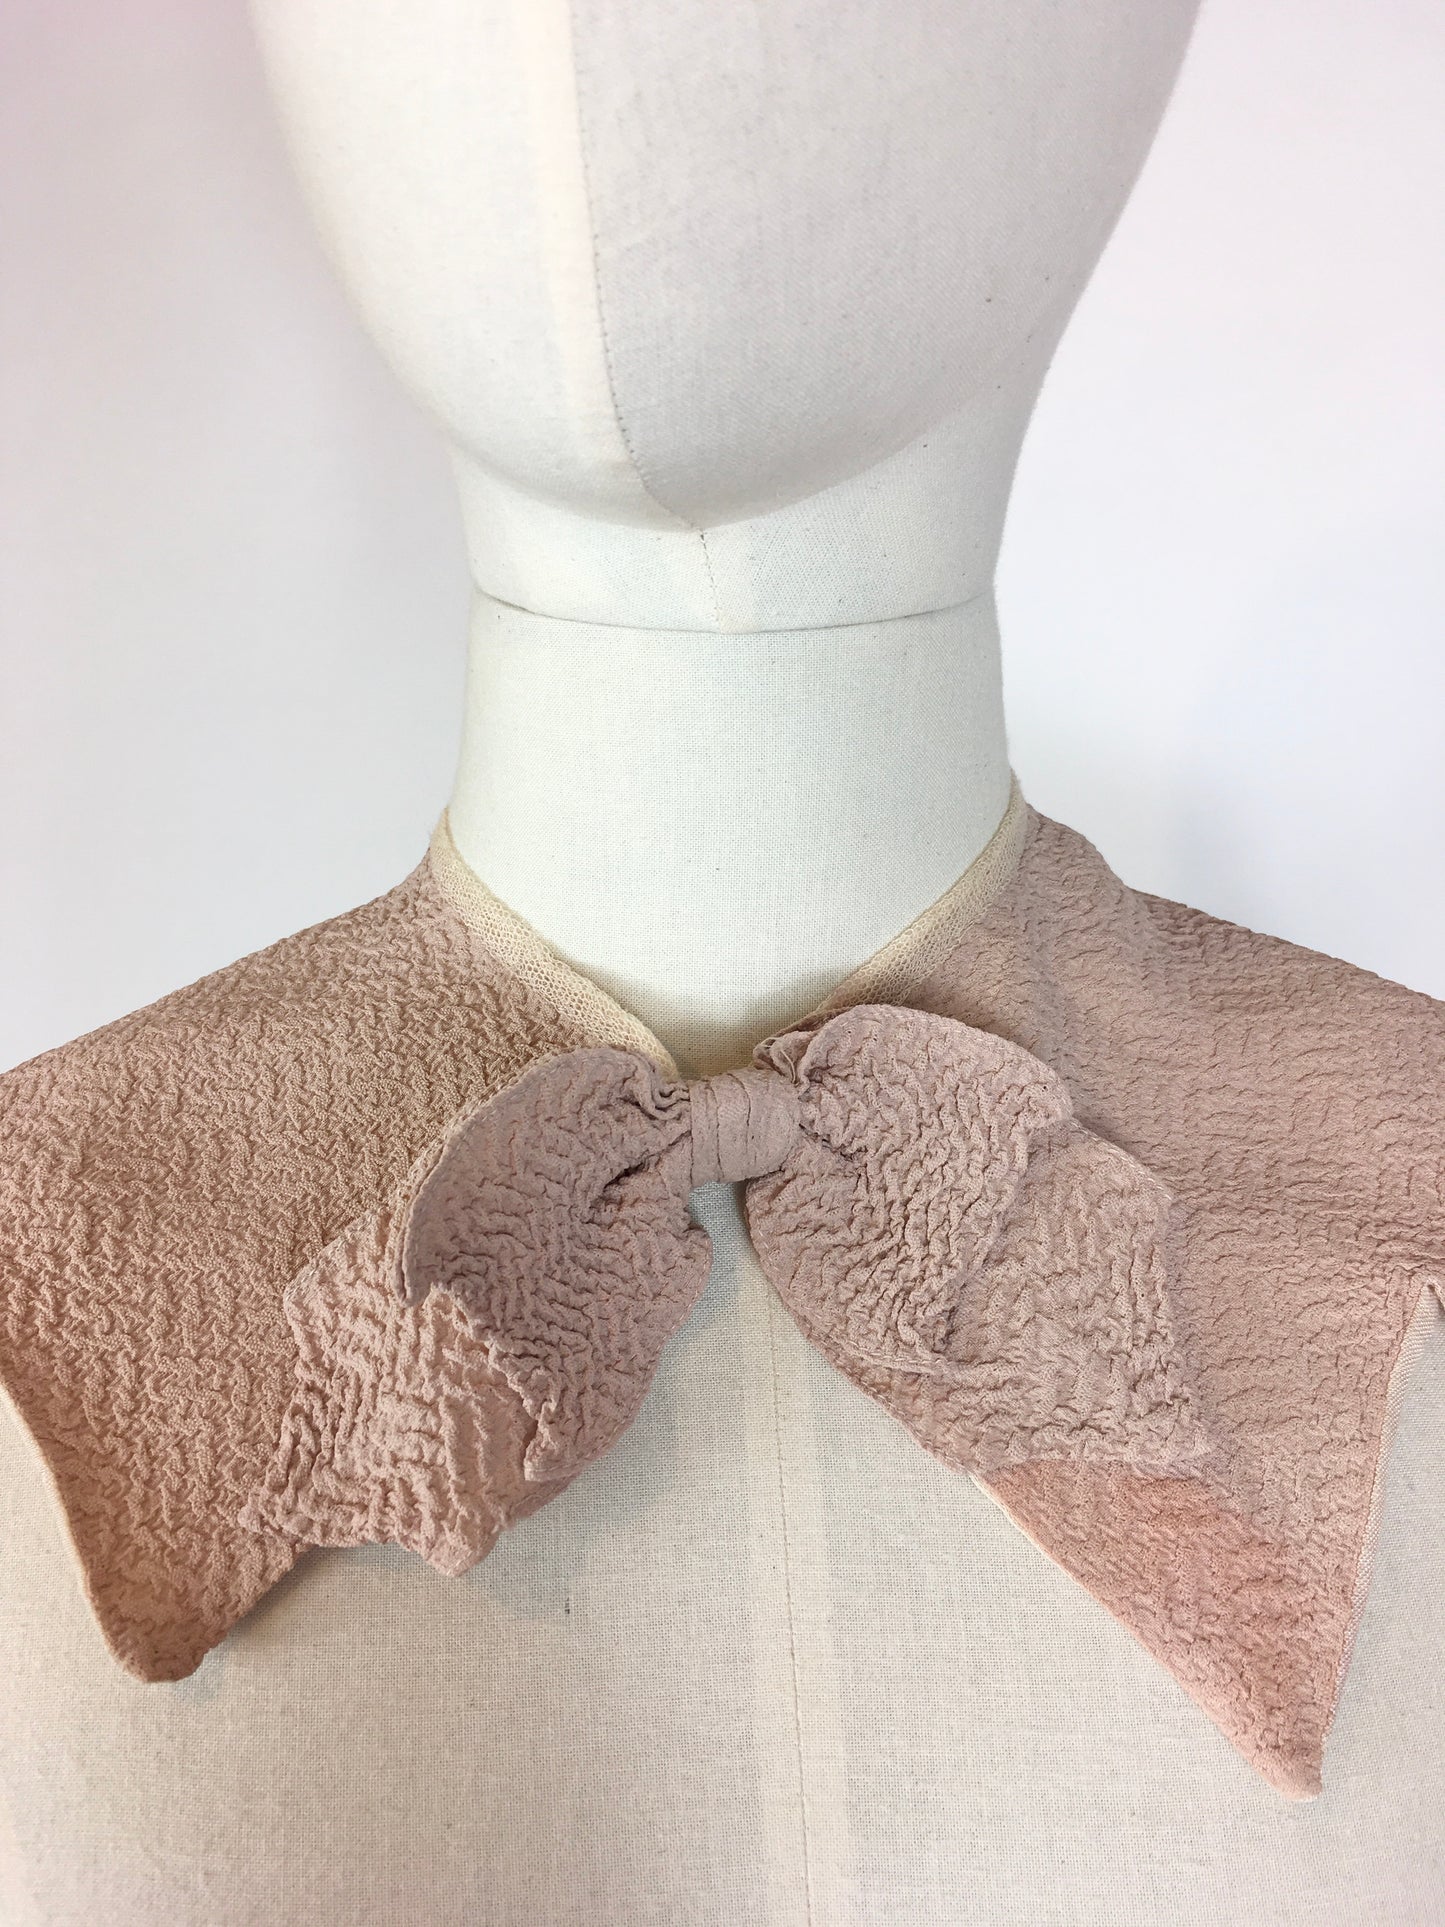 Original 1930’s / 1940’s Collar with Bow Detailing - In A Powder Pink Crepe